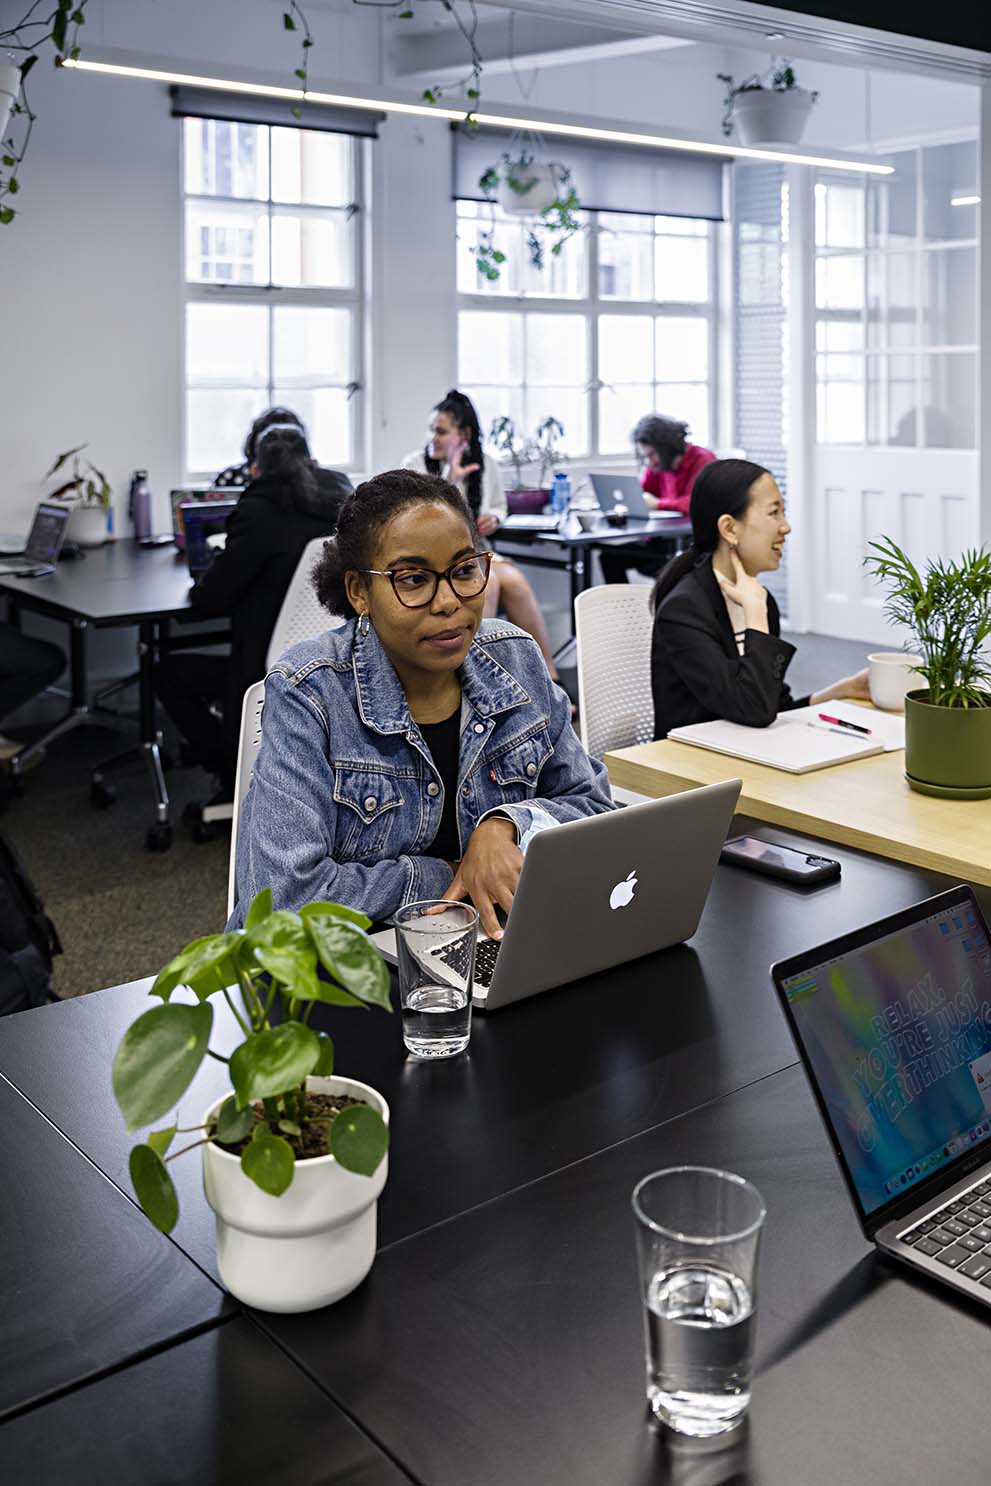 Photo of woman sitting at a desk in a co-work space, with other workers in the background surrounding her. On the desk is her laptop, phone, glass of water and a plant in a white pot. The room is brightly lit and other workers are talking in the background.